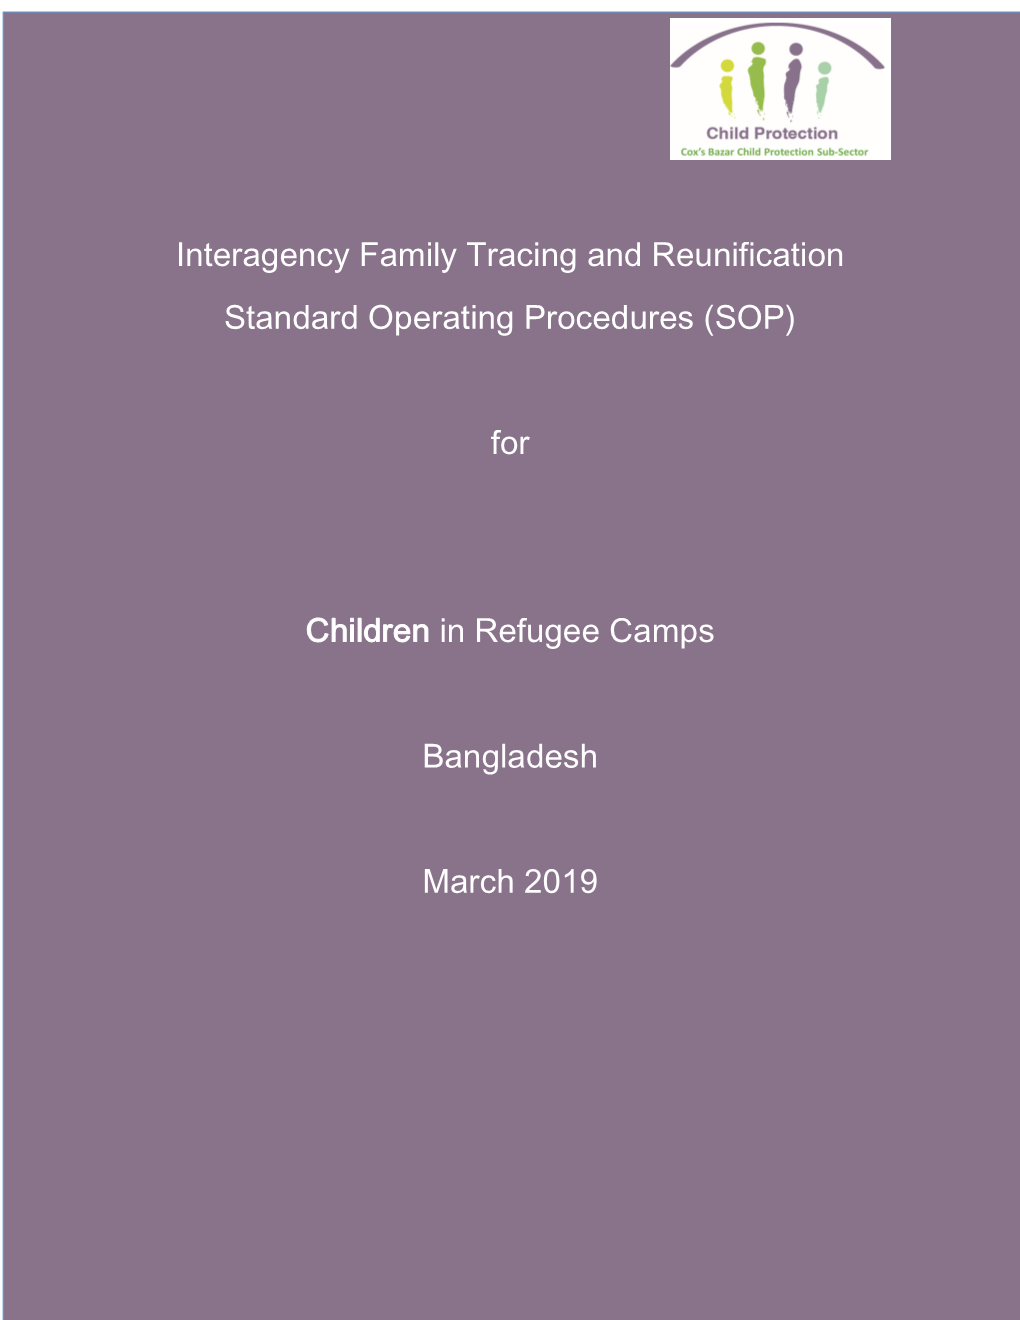 Interagency Family Tracing and Reunification Standard Operating